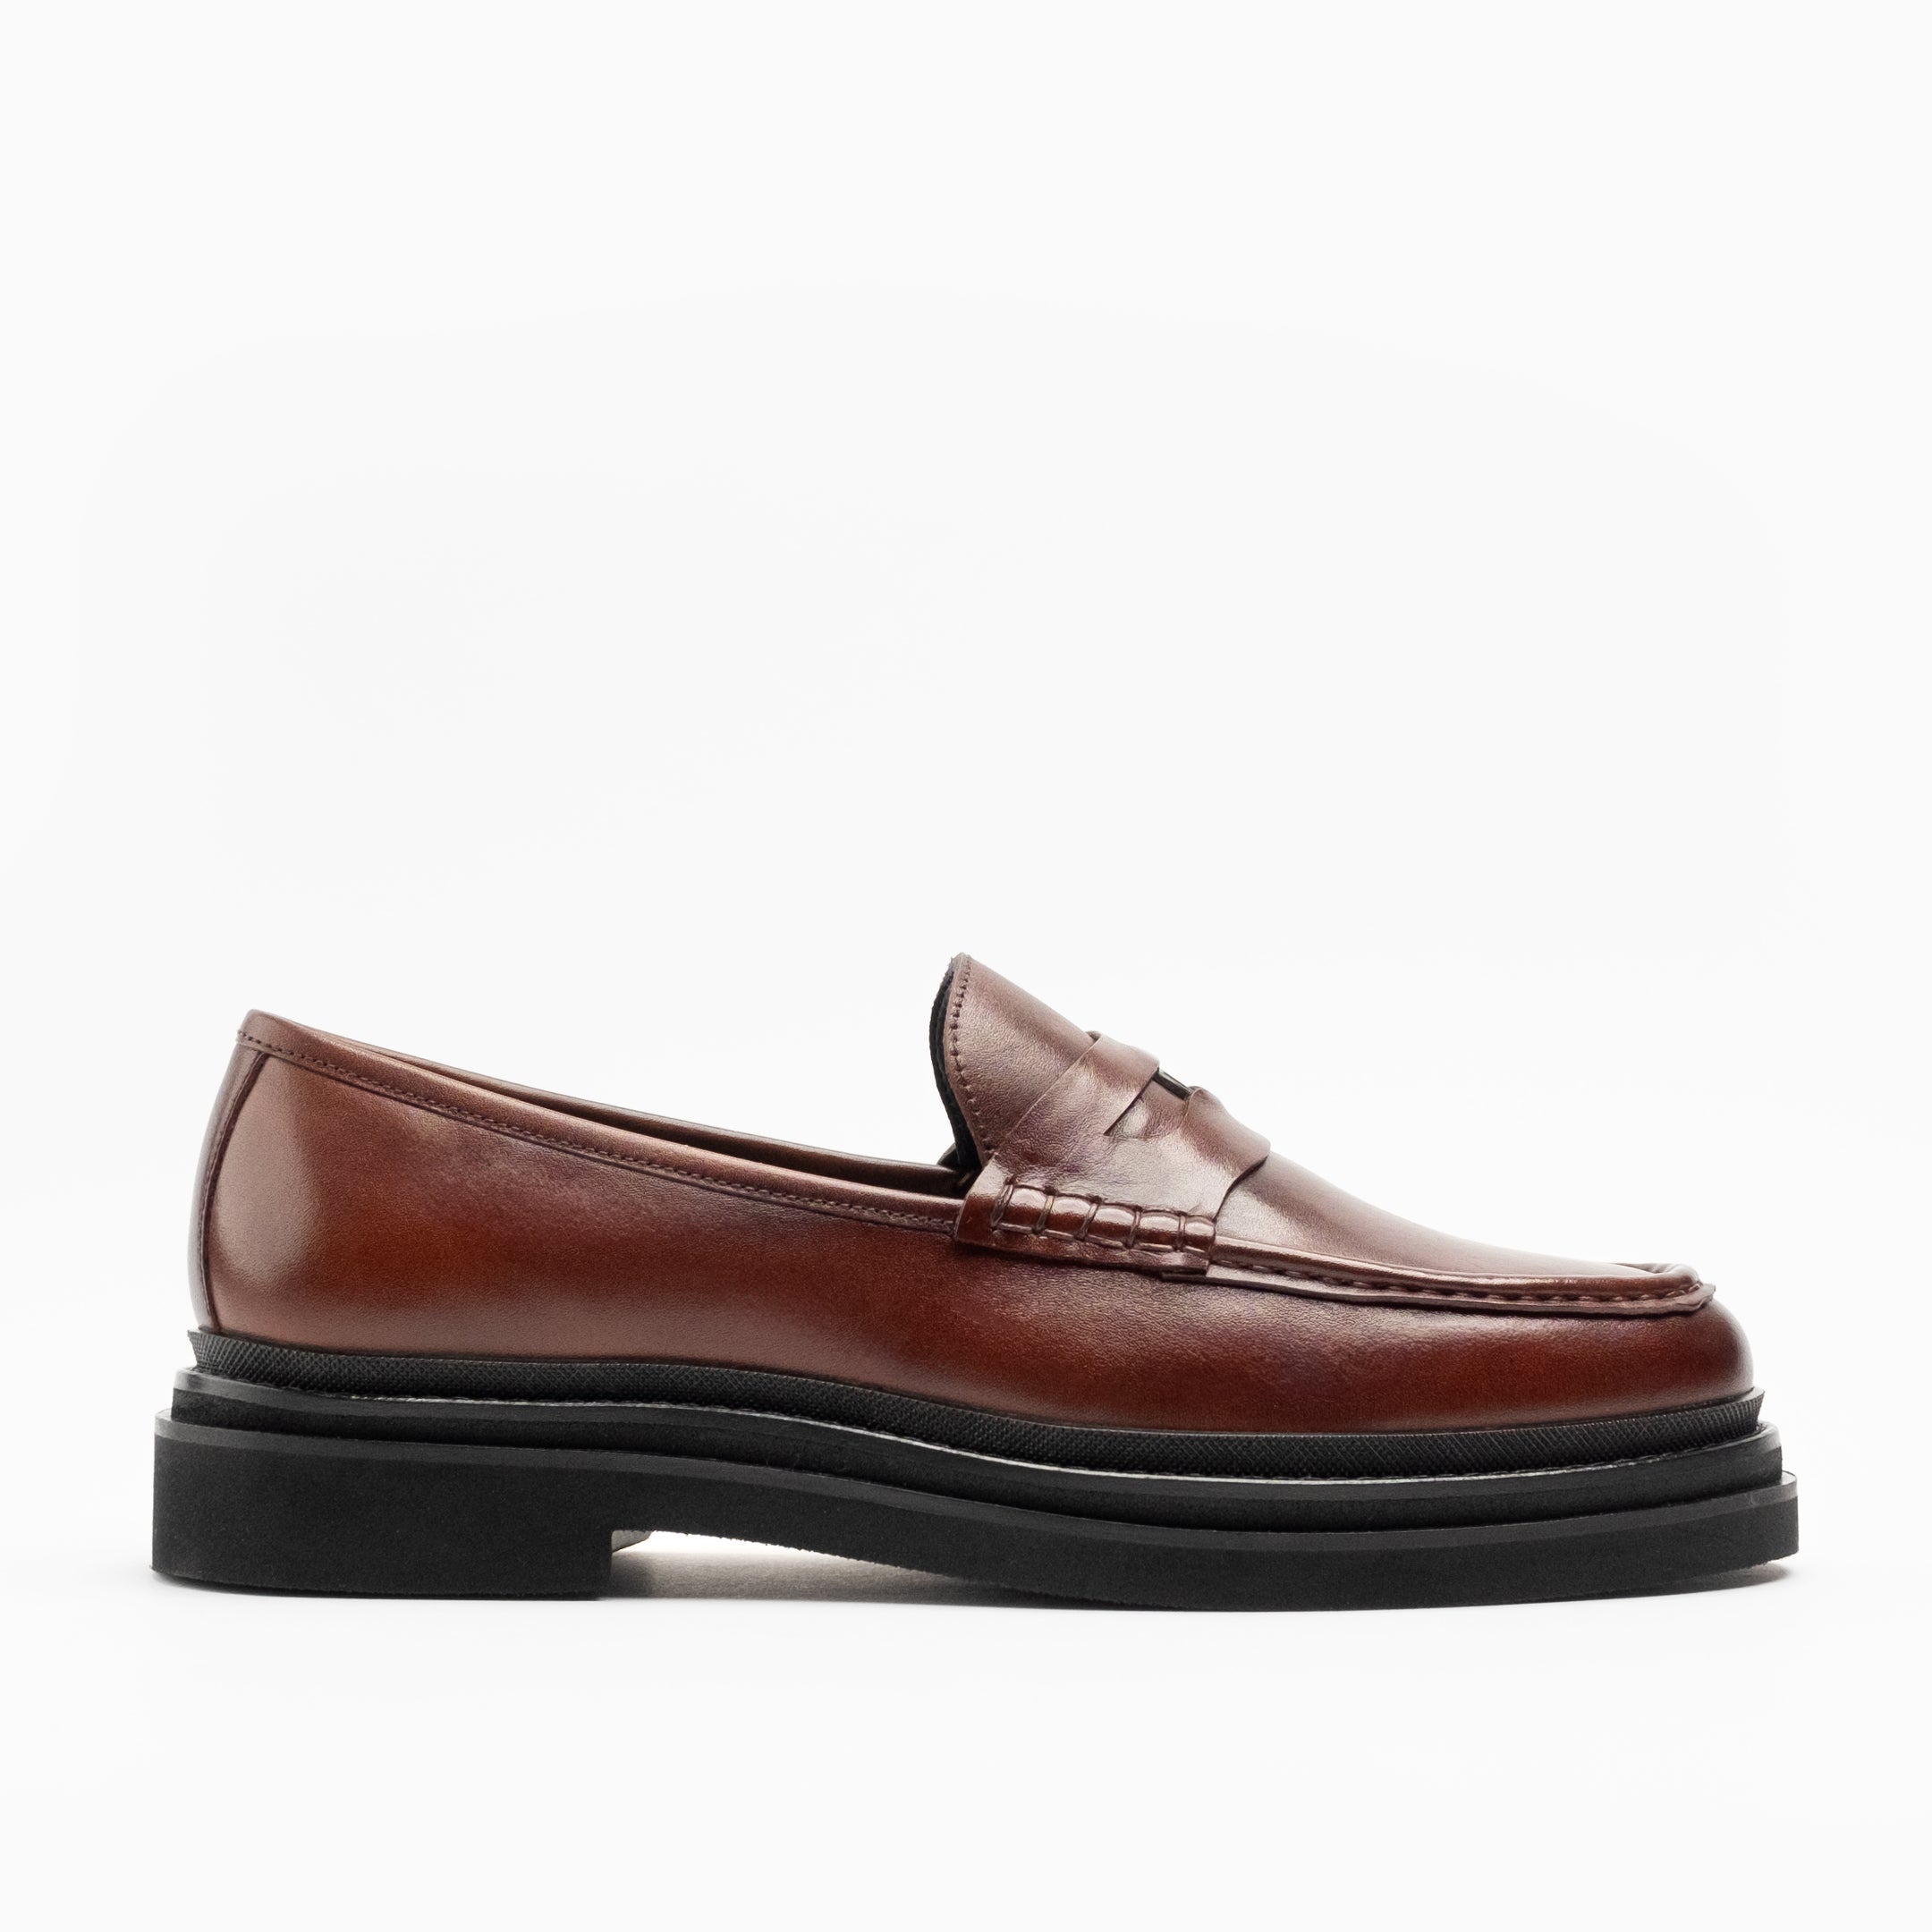 Walk London Mens Brooklyn Penny Loafer in Brown Leather